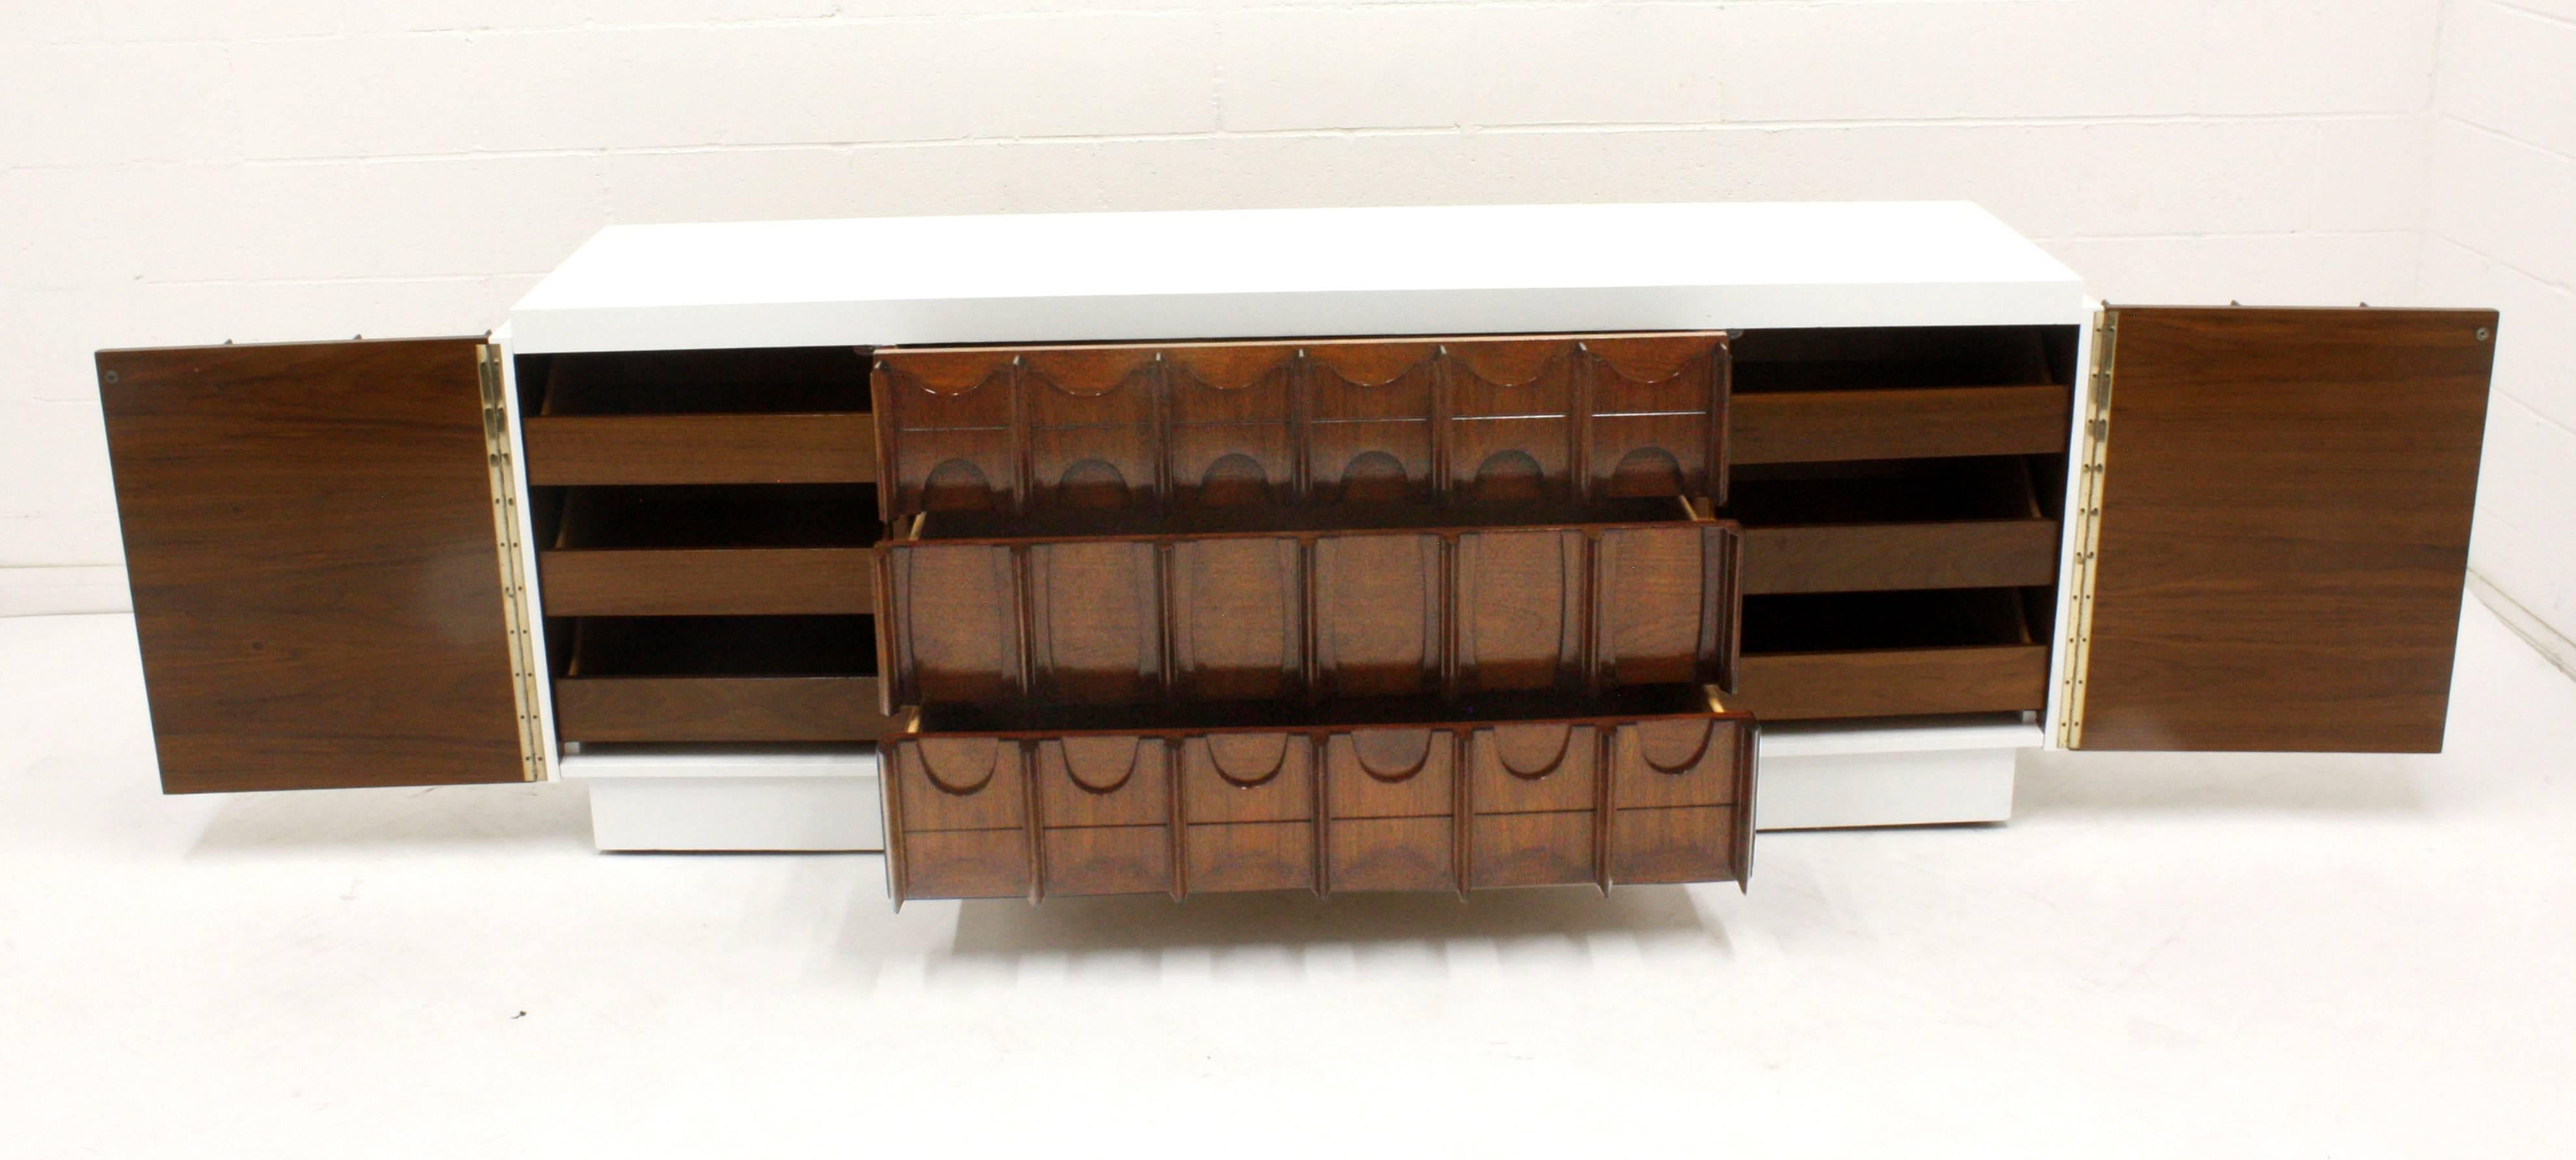 Carved Mid-Century Modern Lacquered Broyhill Credenza